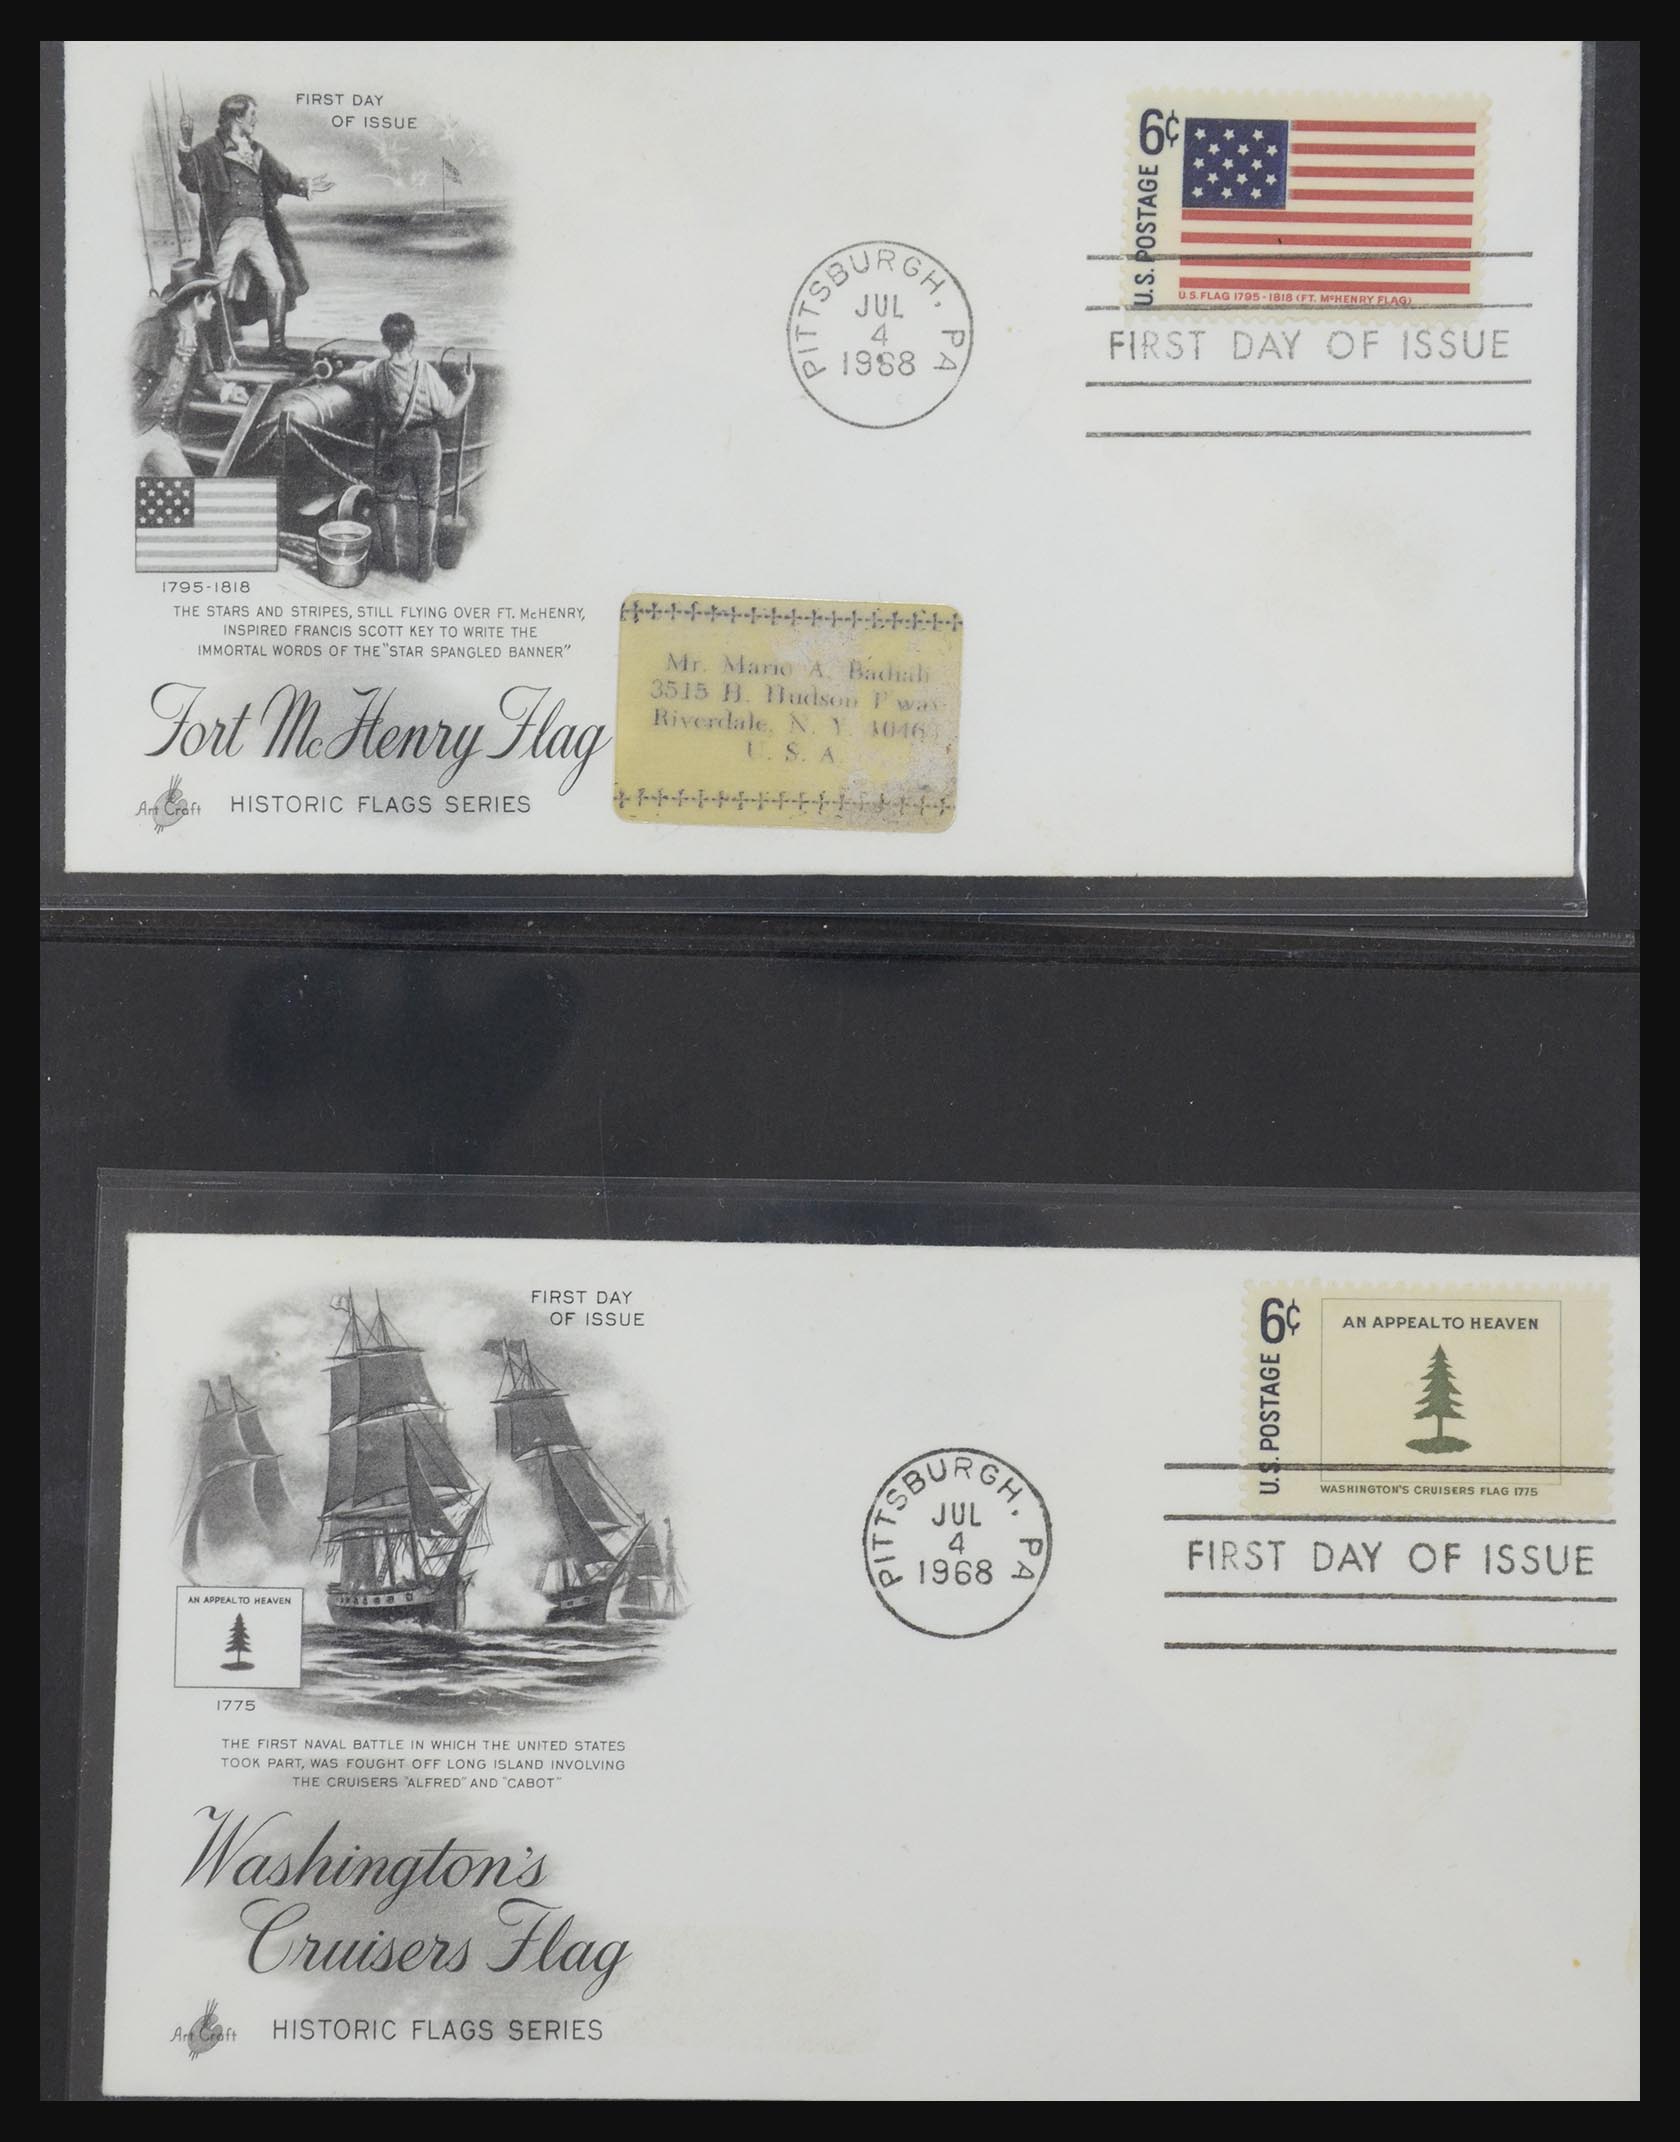 31913 0054 - 31913 USA fdc-collectie 1945-1990.